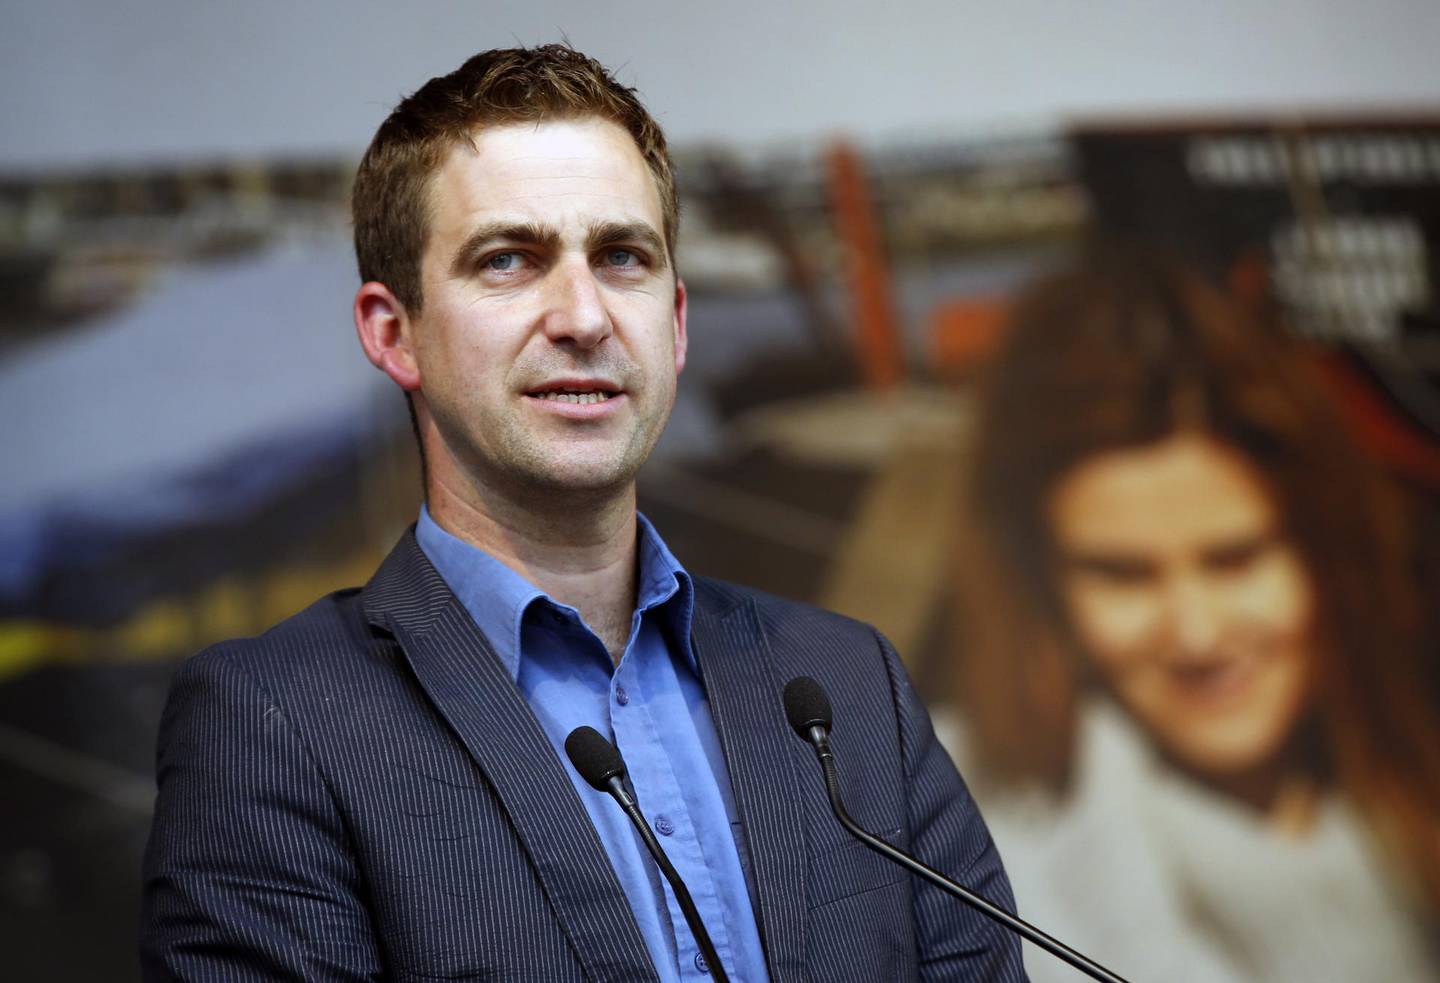 FILE - In this Wednesday, June 22, 2016 file photo, Brendan Cox, widower of murdered British MP Jo Cox makes a speech during a gathering to celebrate her life, in Trafalgar Square, London. The widower of a slain British legislator stepped down from two charities on Saturday Feb. 18, 2018, set up in her memory after allegations of sexual misconduct in the past were reported. (AP Photo/Alastair Grant, File)